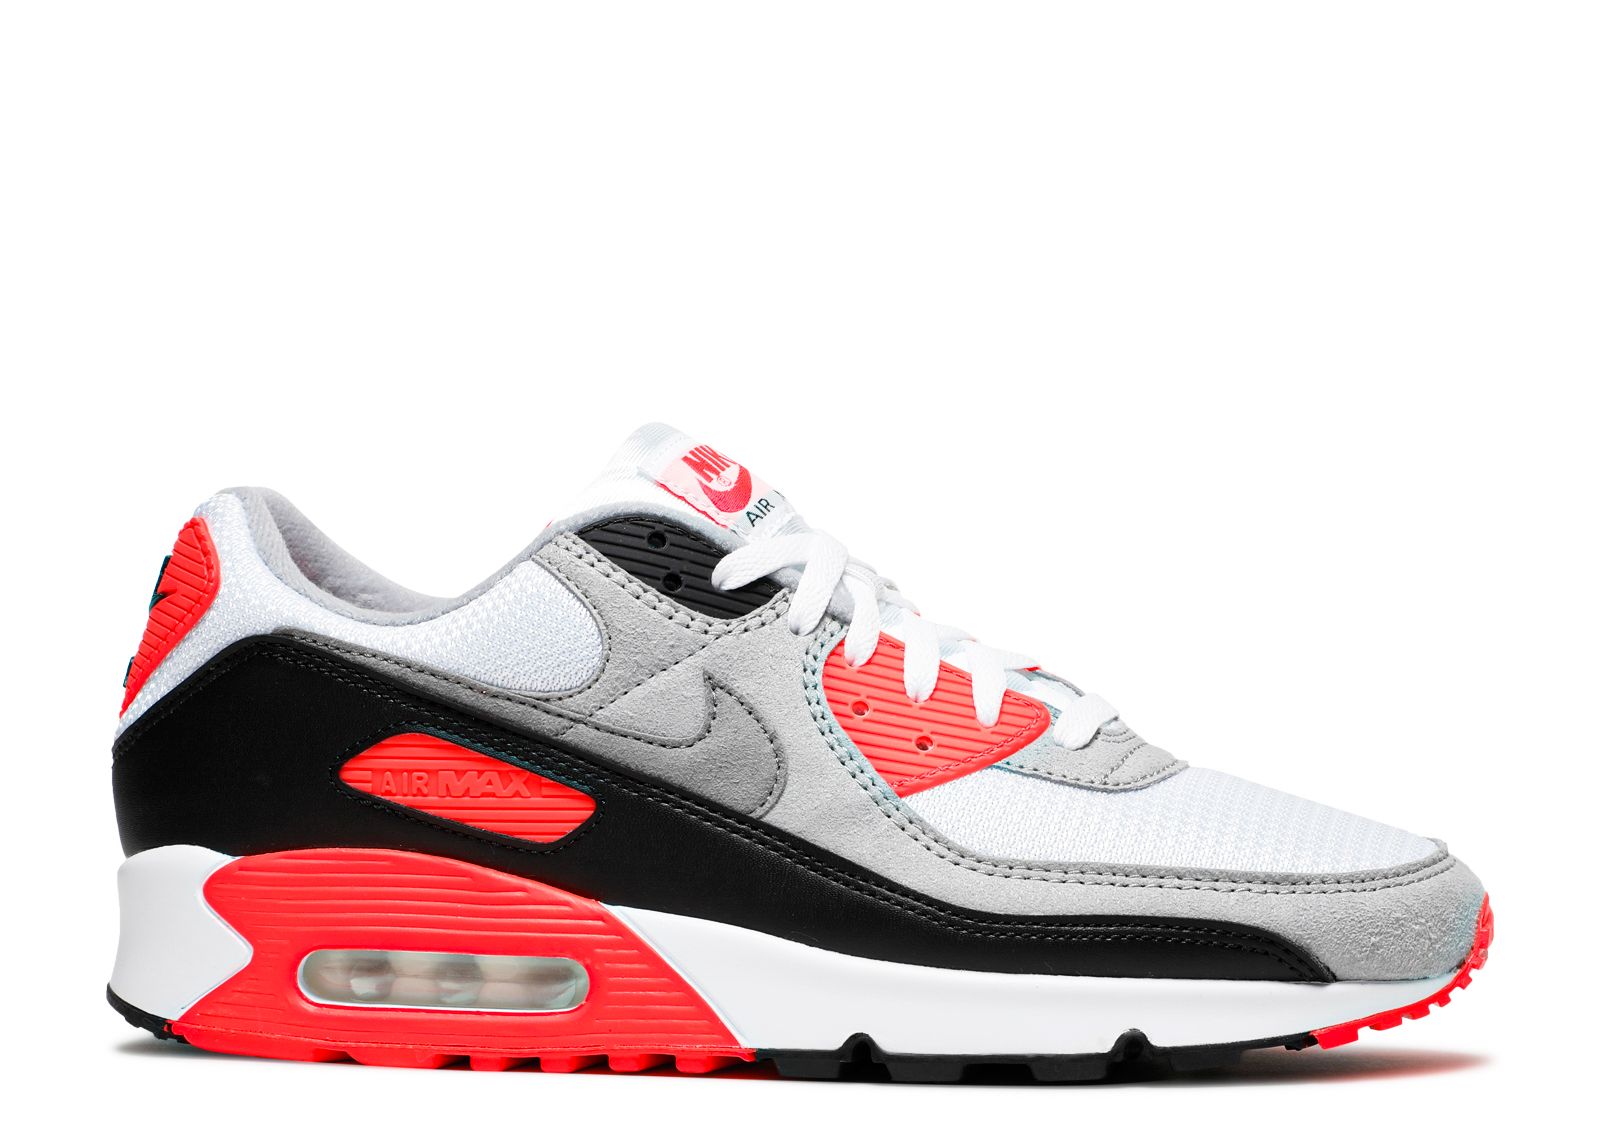 Air Max 90 'Infrared' 2020 - Nike - CT1685 100 - white/black/cool red | Flight